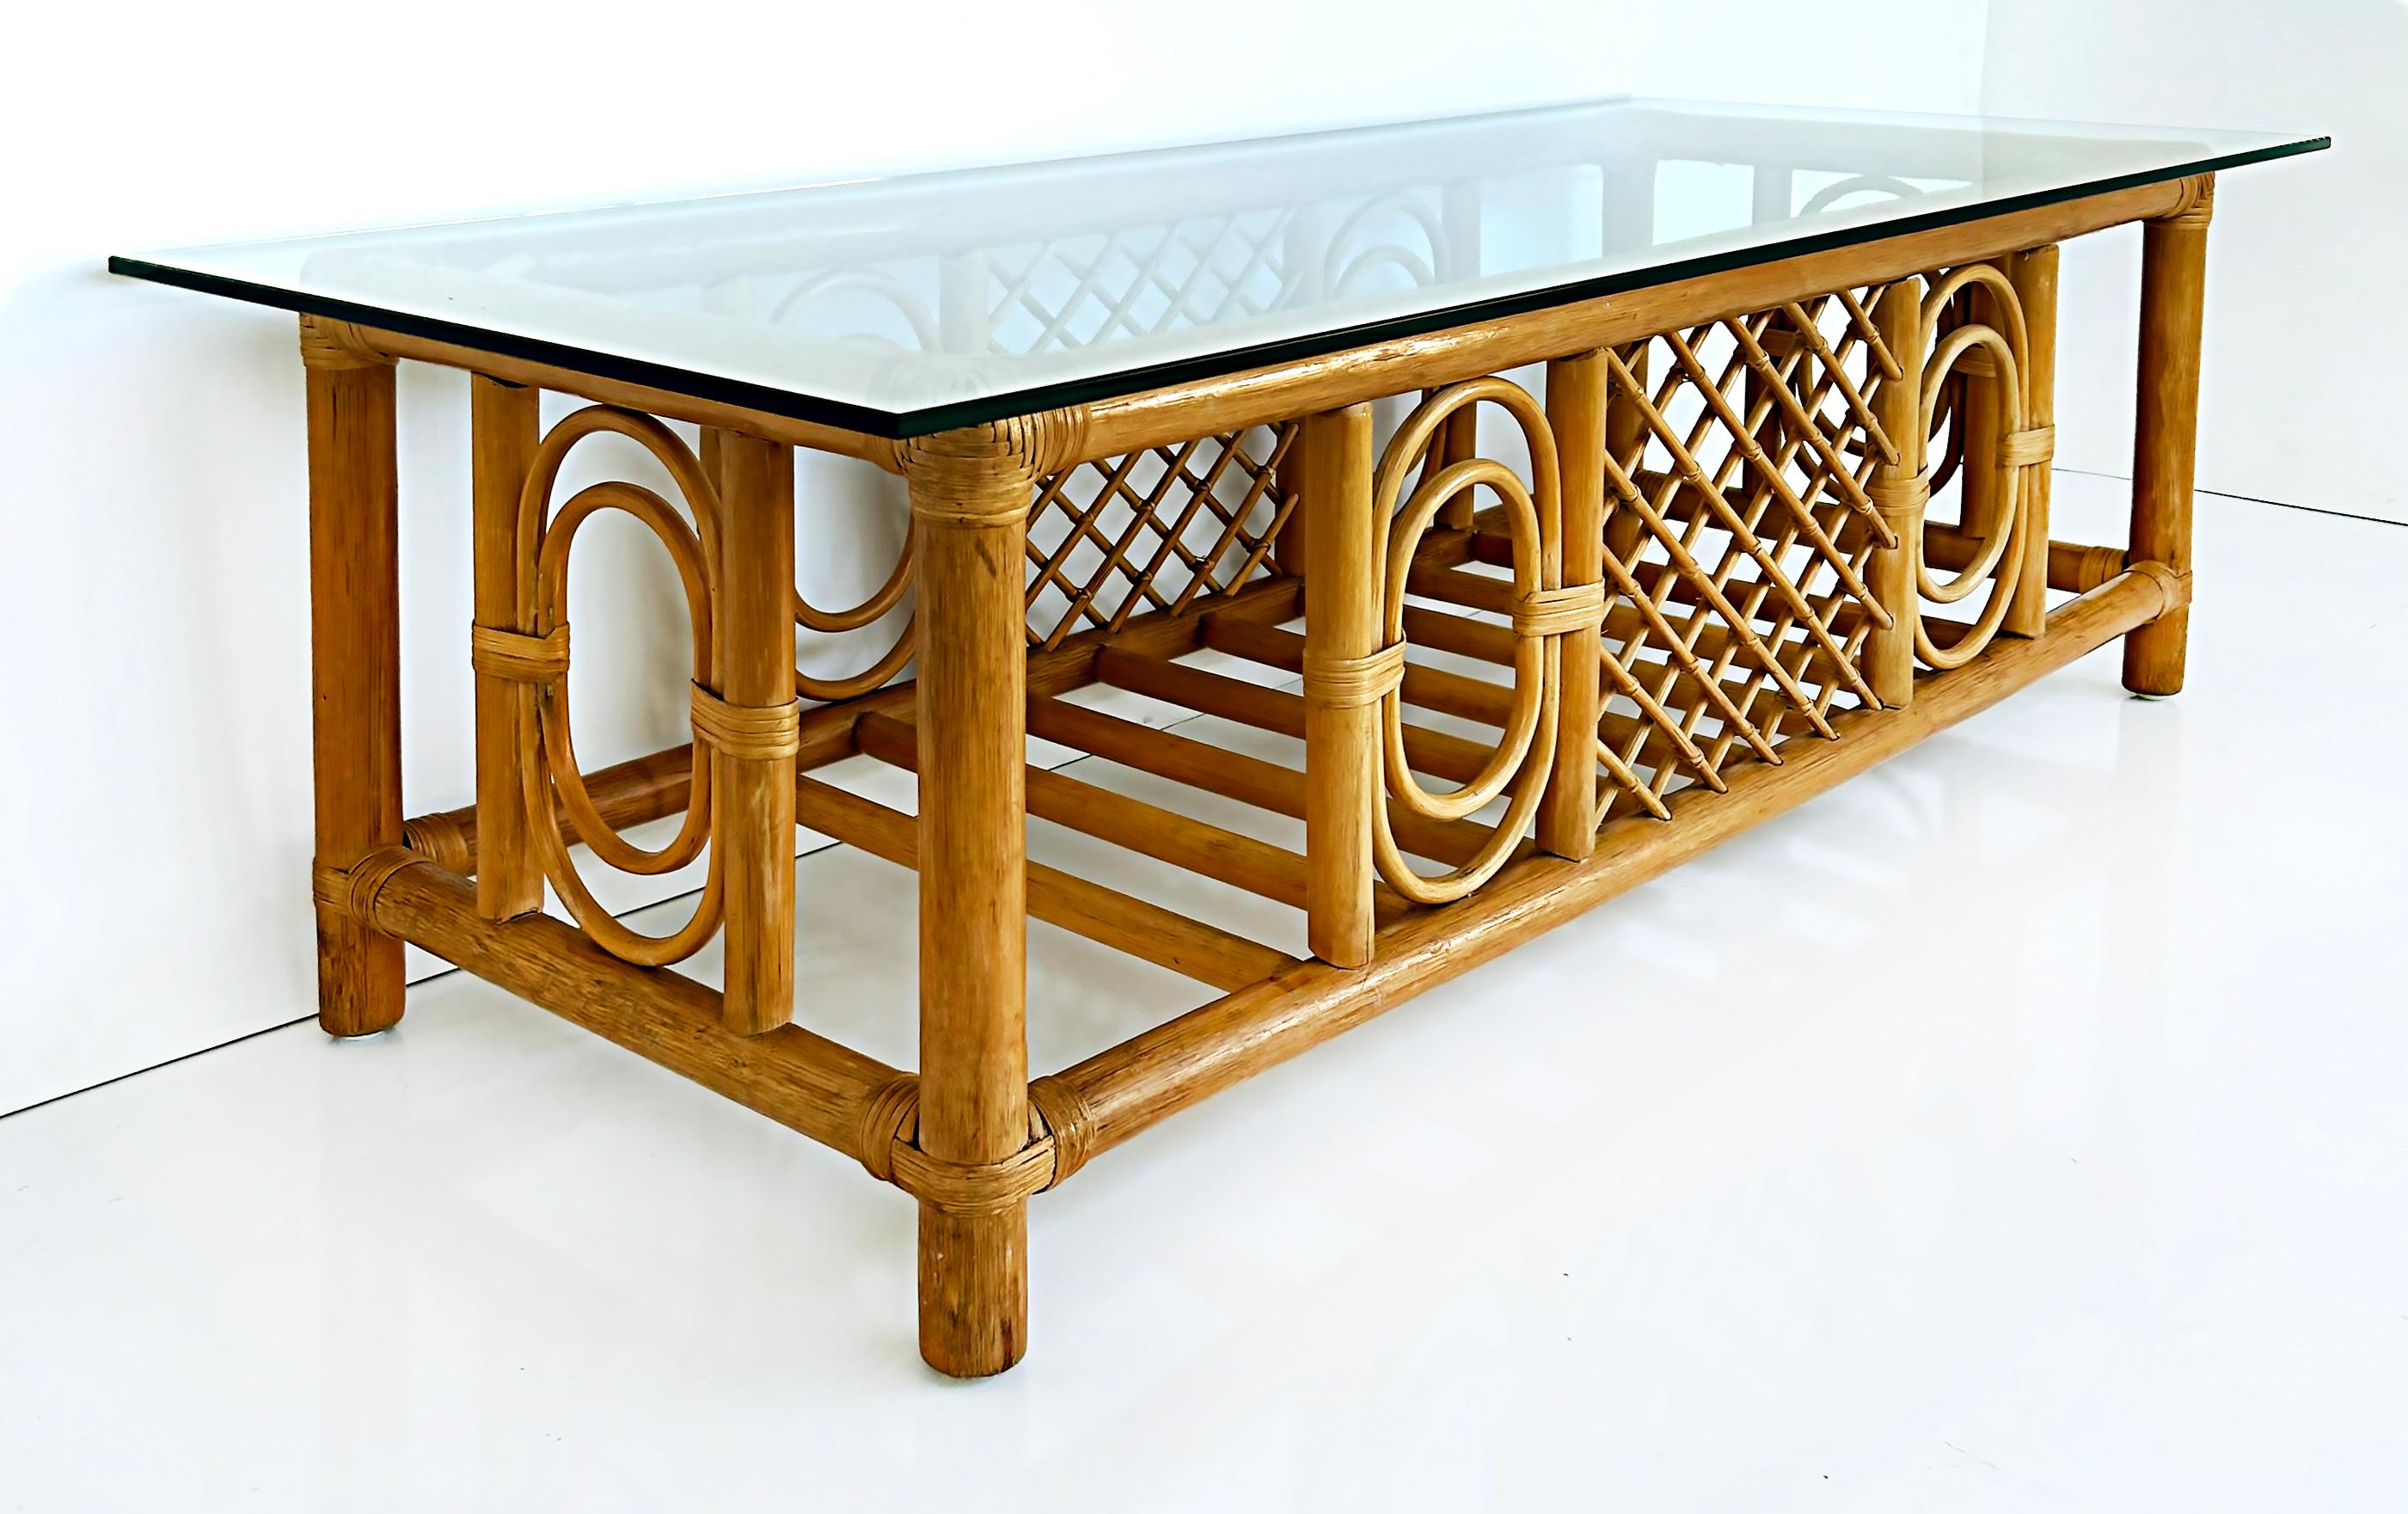 Vintage coastal rattan coffee cocktail table with glass top.

Offered for sale is a coastal rattan coffee cocktail table with a thick glass top. The table has a rectangular frame with decorative bent and crossed rattan details. The corners and